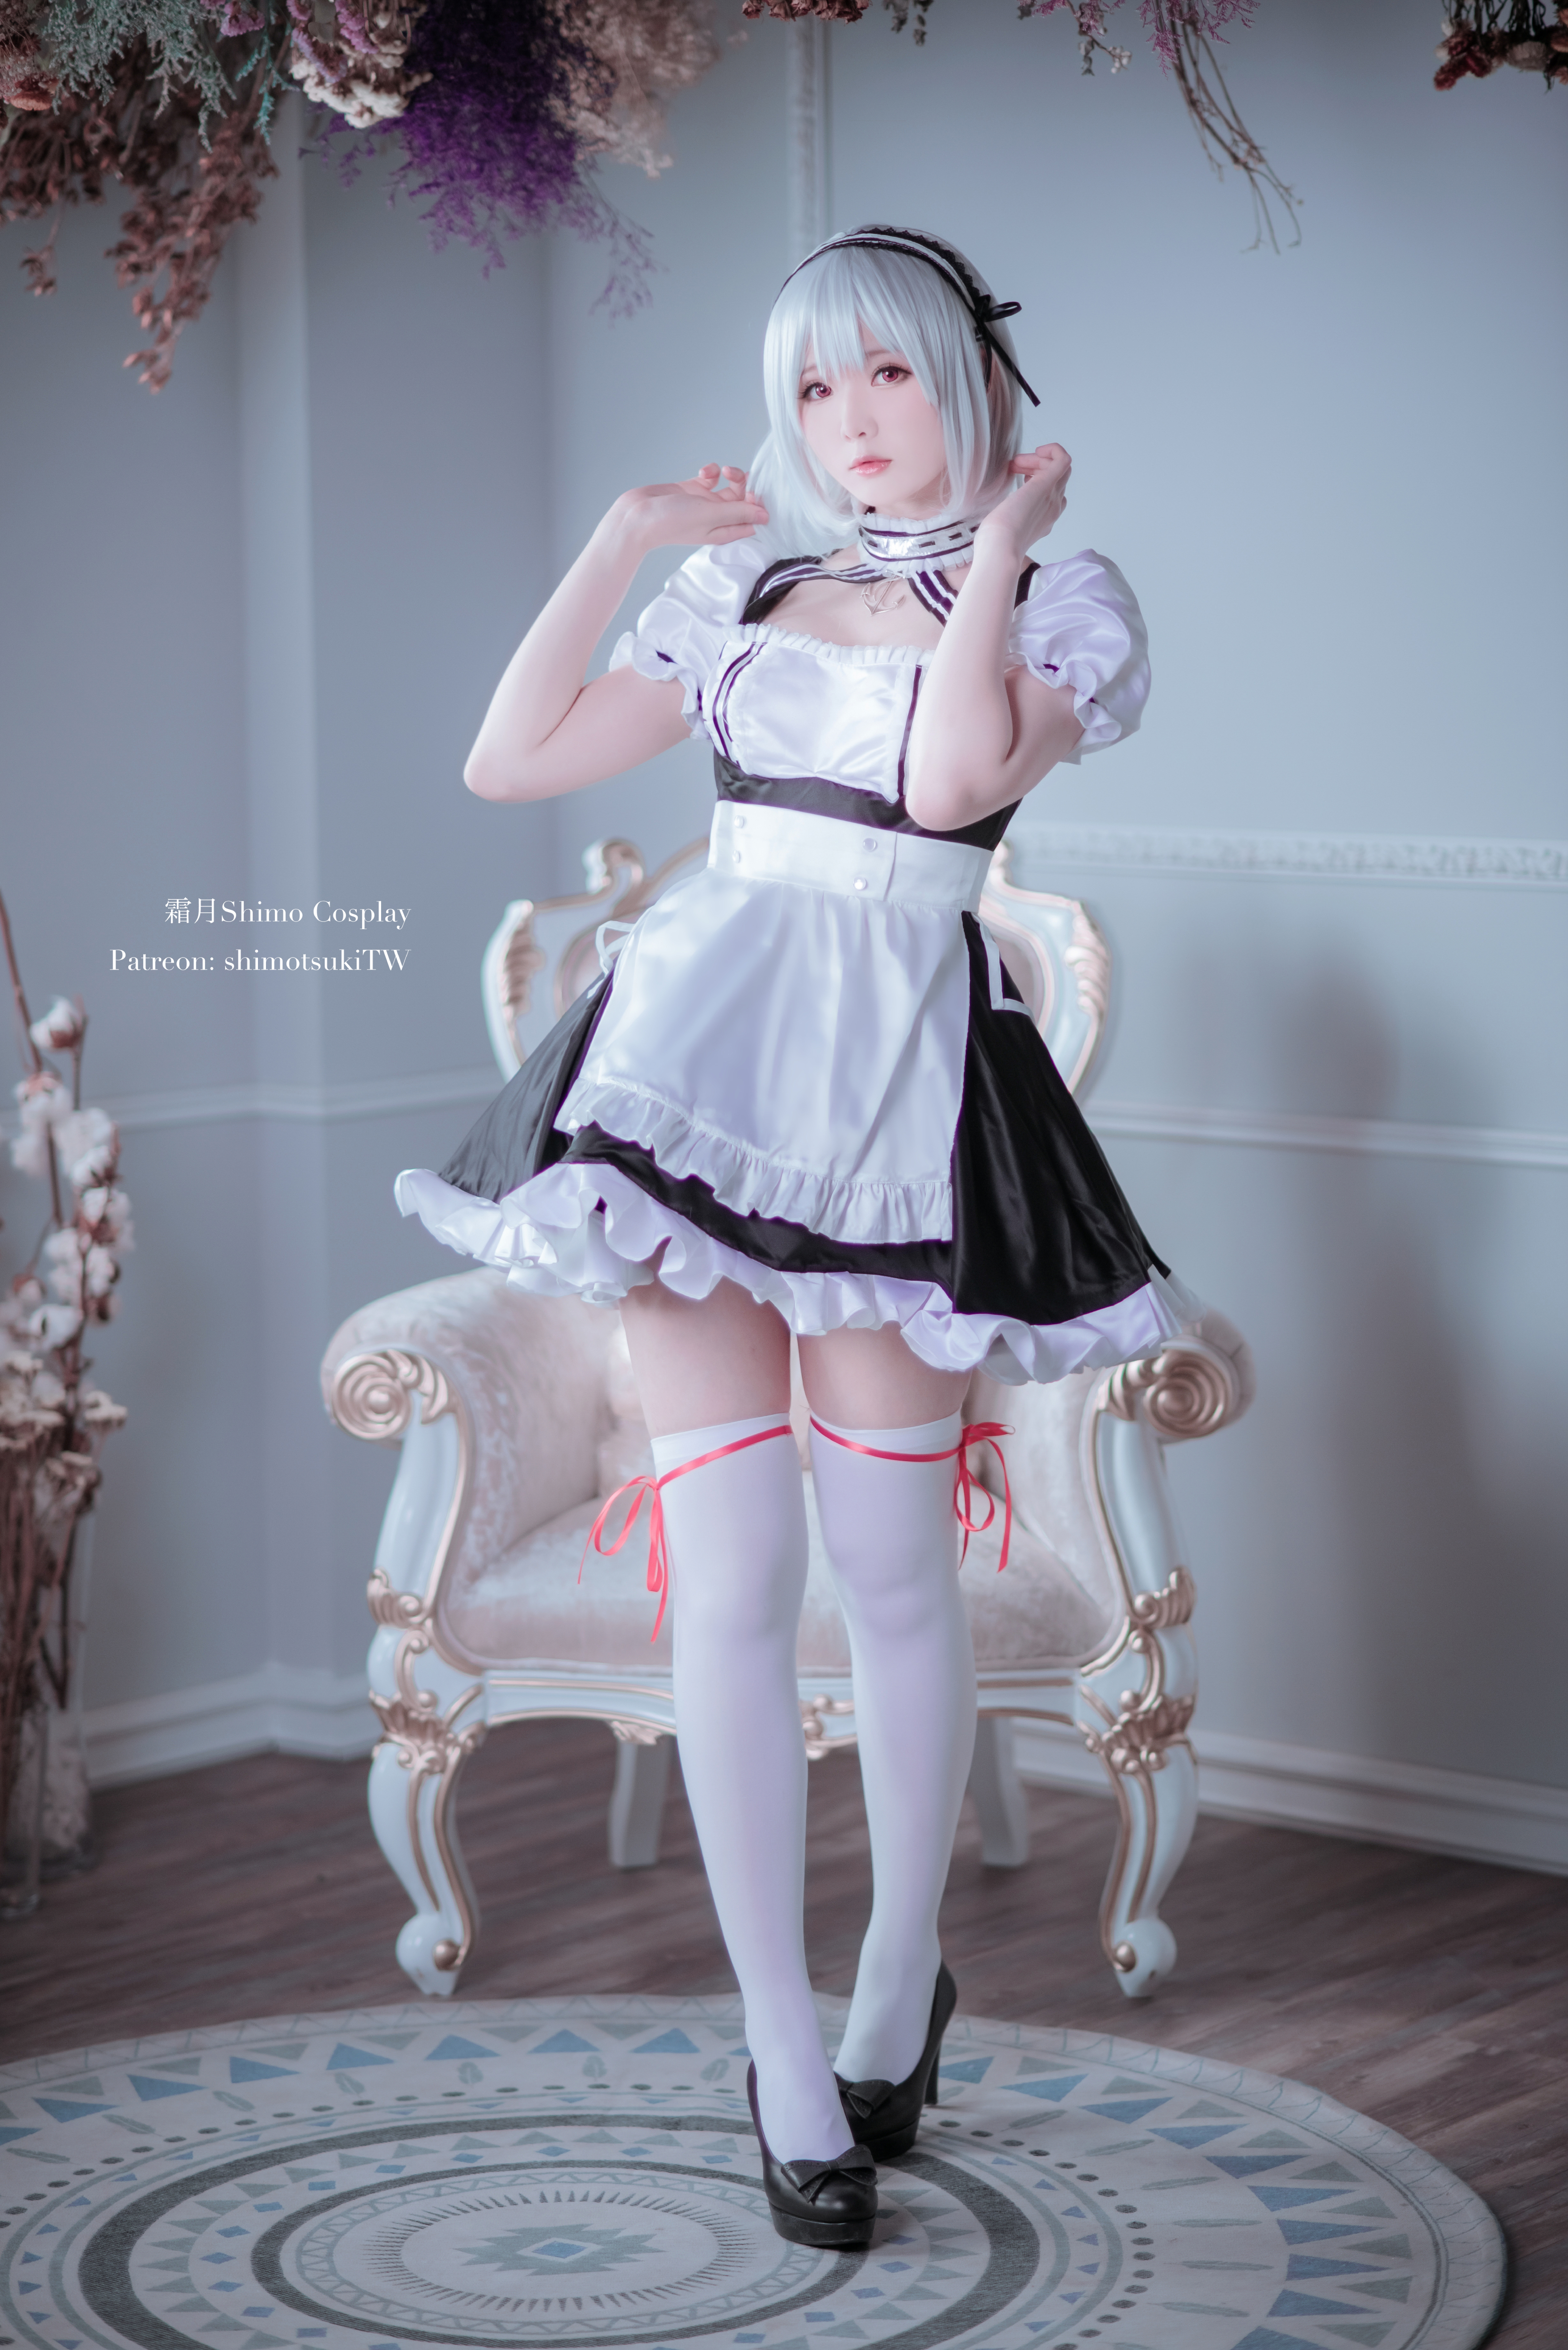 Women Asian Model Cosplay Sirius Azur Lane Azur Lane Video Games Maid Dress Maid Outfit Indoors Wome 3337x5000